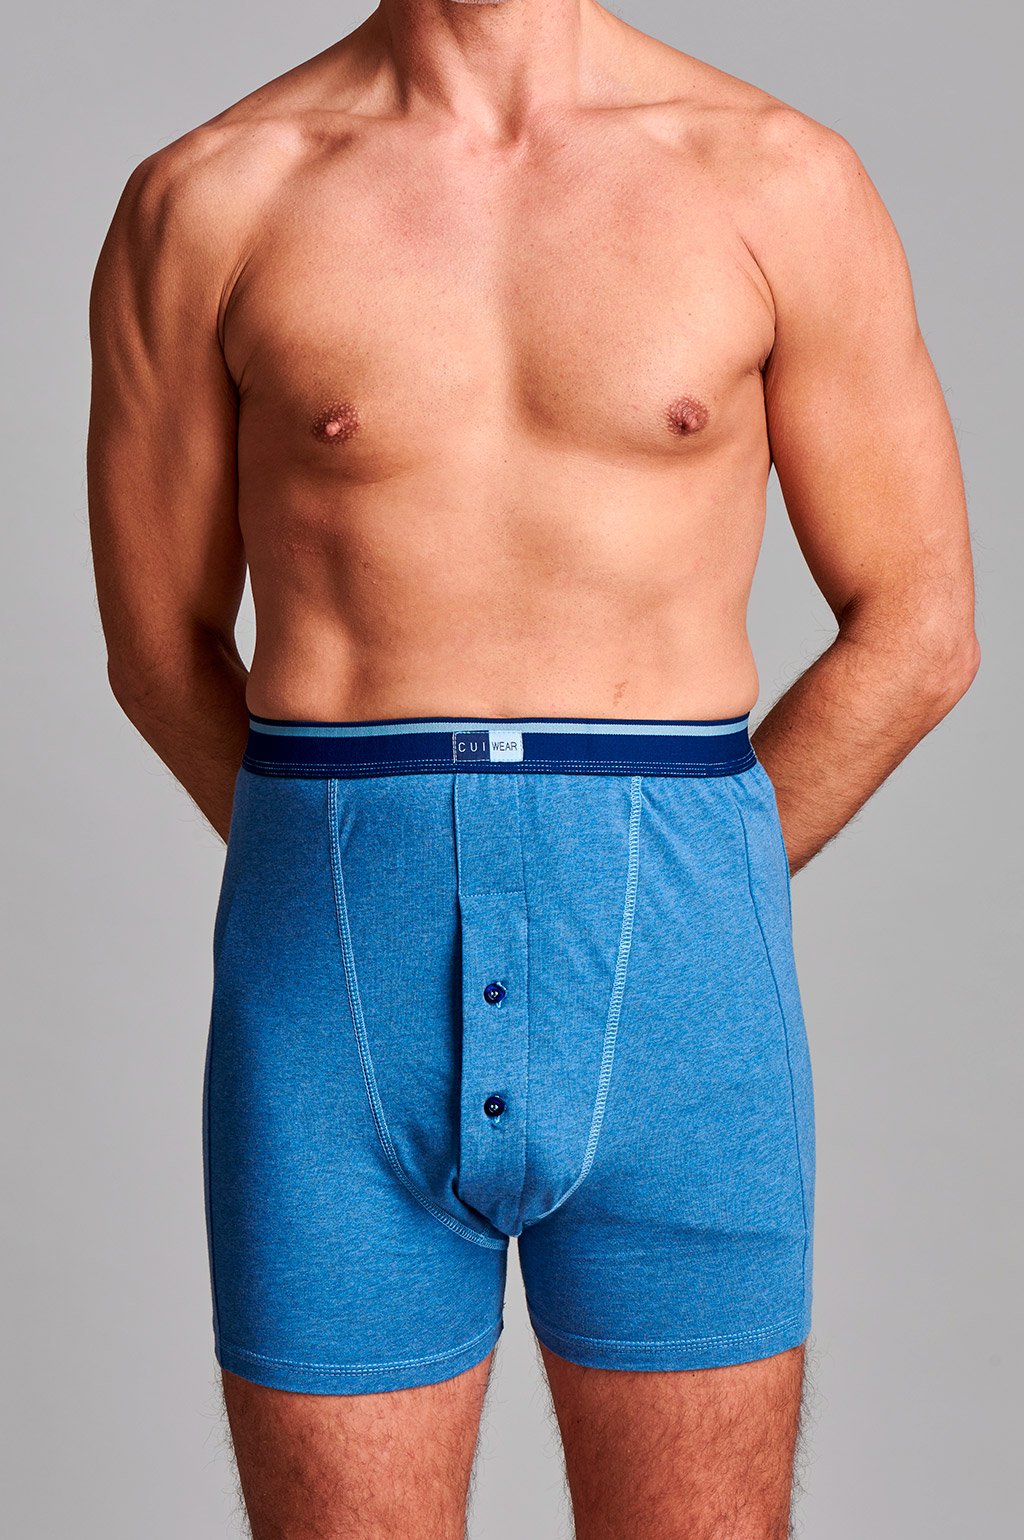 CUI Mens Ostomy High Waist Cotton Fitted Trunk - 1 each, SMALL, DENIM - TWIN